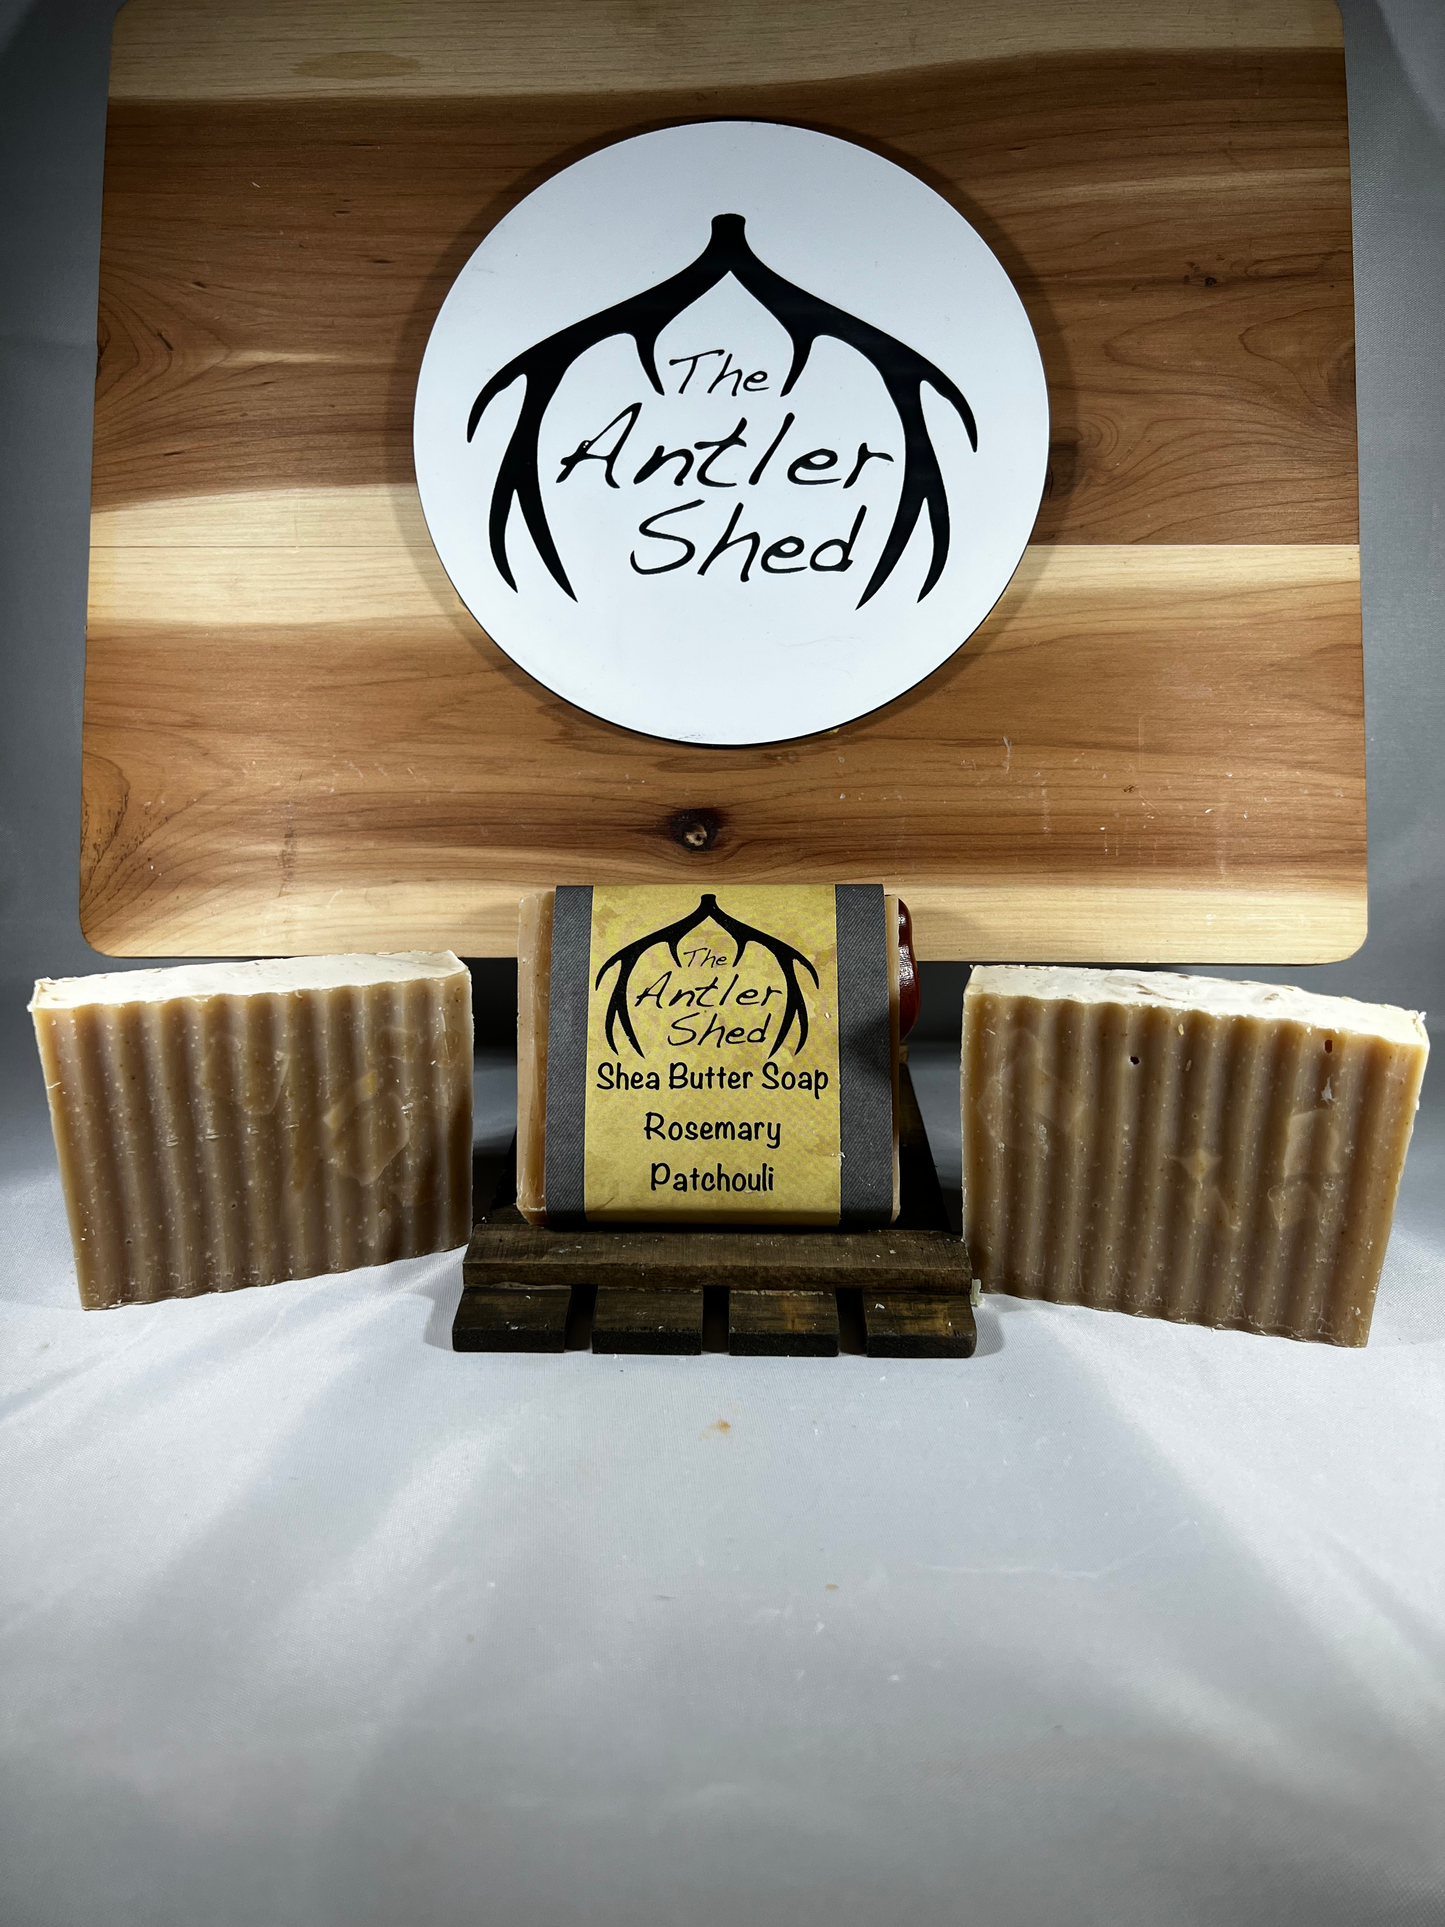 Rosemary Patchouli Shea Butter Cold Process Handmade Soap